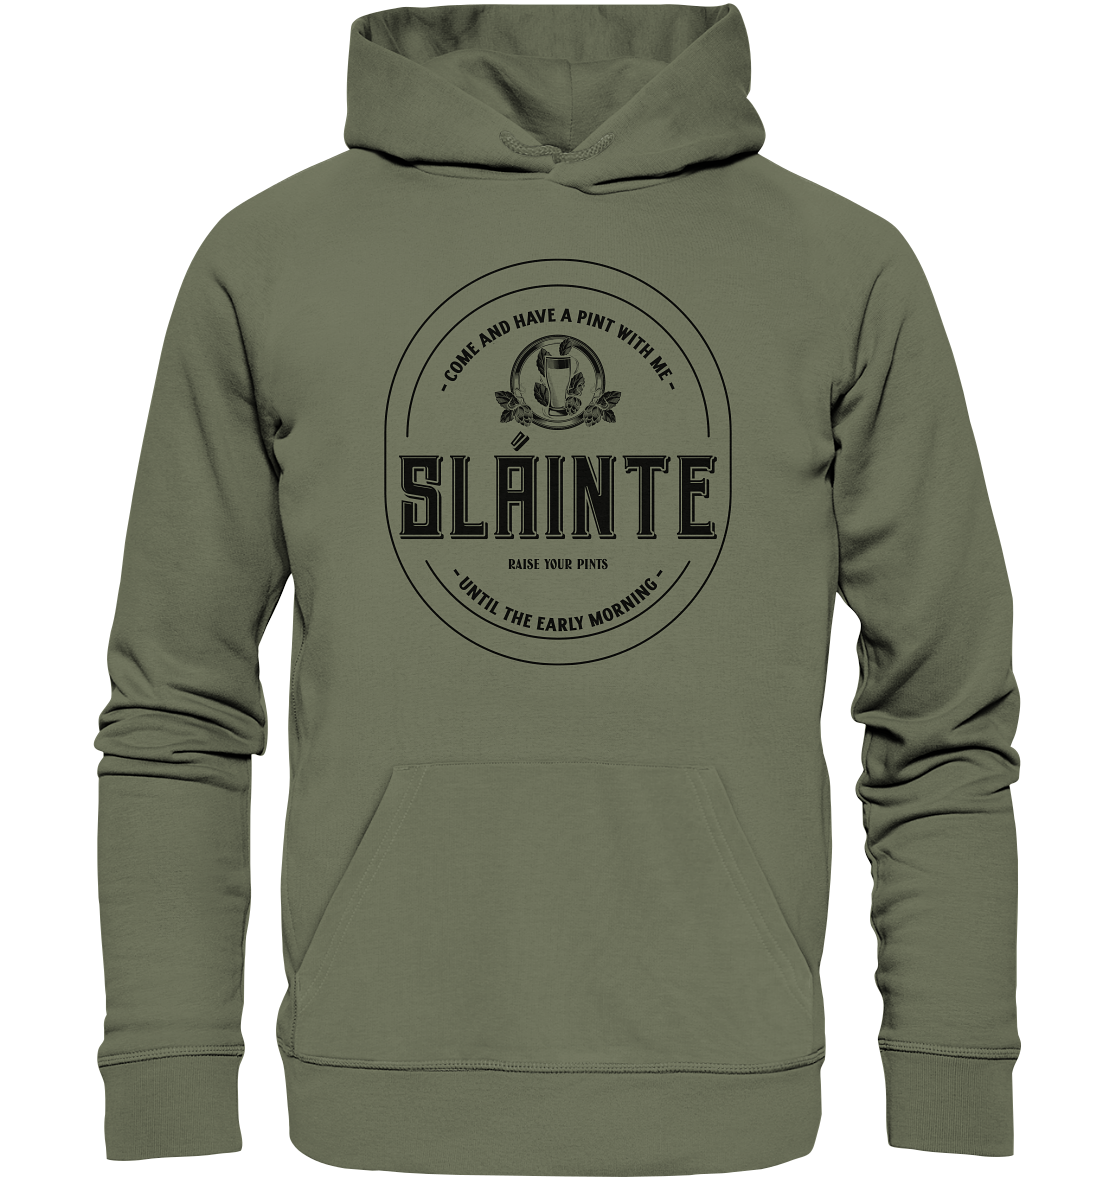 Sláinte "Come And Have A Pint With Me" - Premium Unisex Hoodie